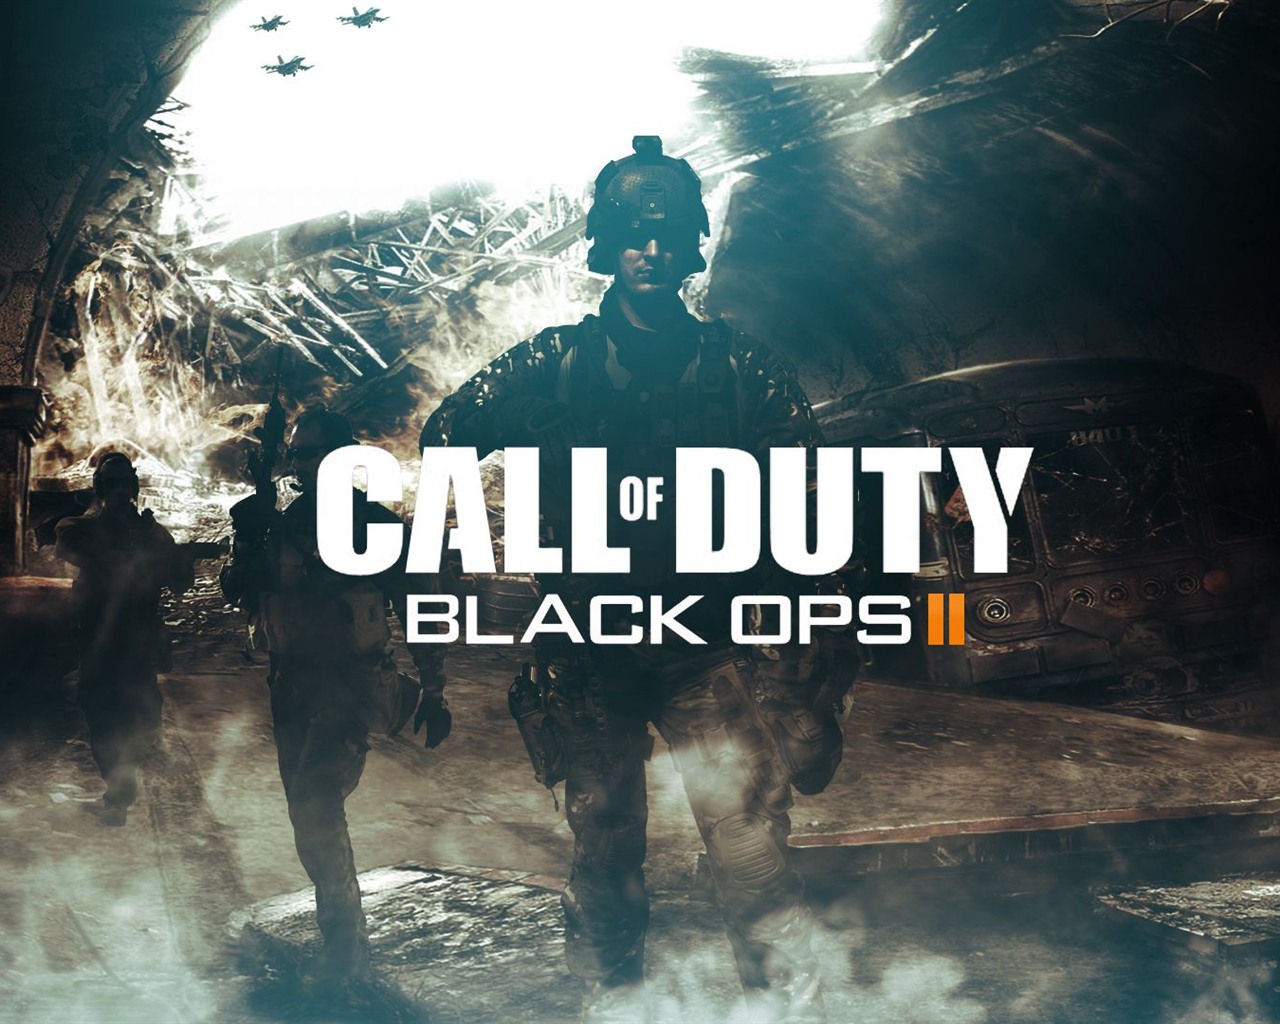 Call of Duty: Black Ops 2 HD wallpapers #10 - 1280x1024